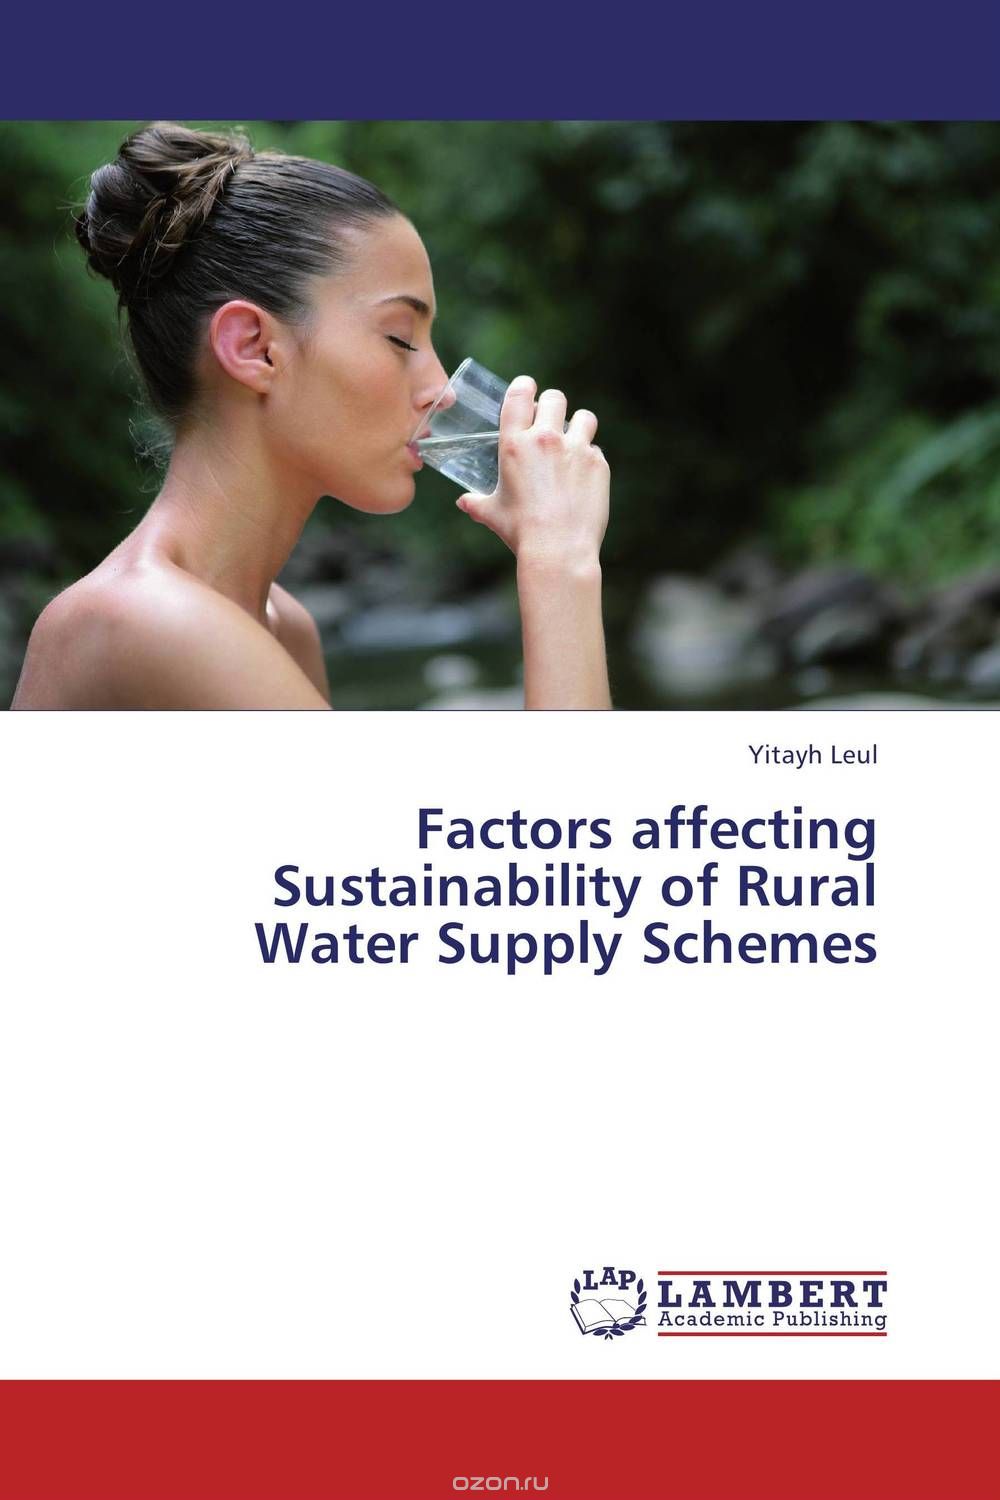 Factors affecting Sustainability of Rural Water Supply Schemes